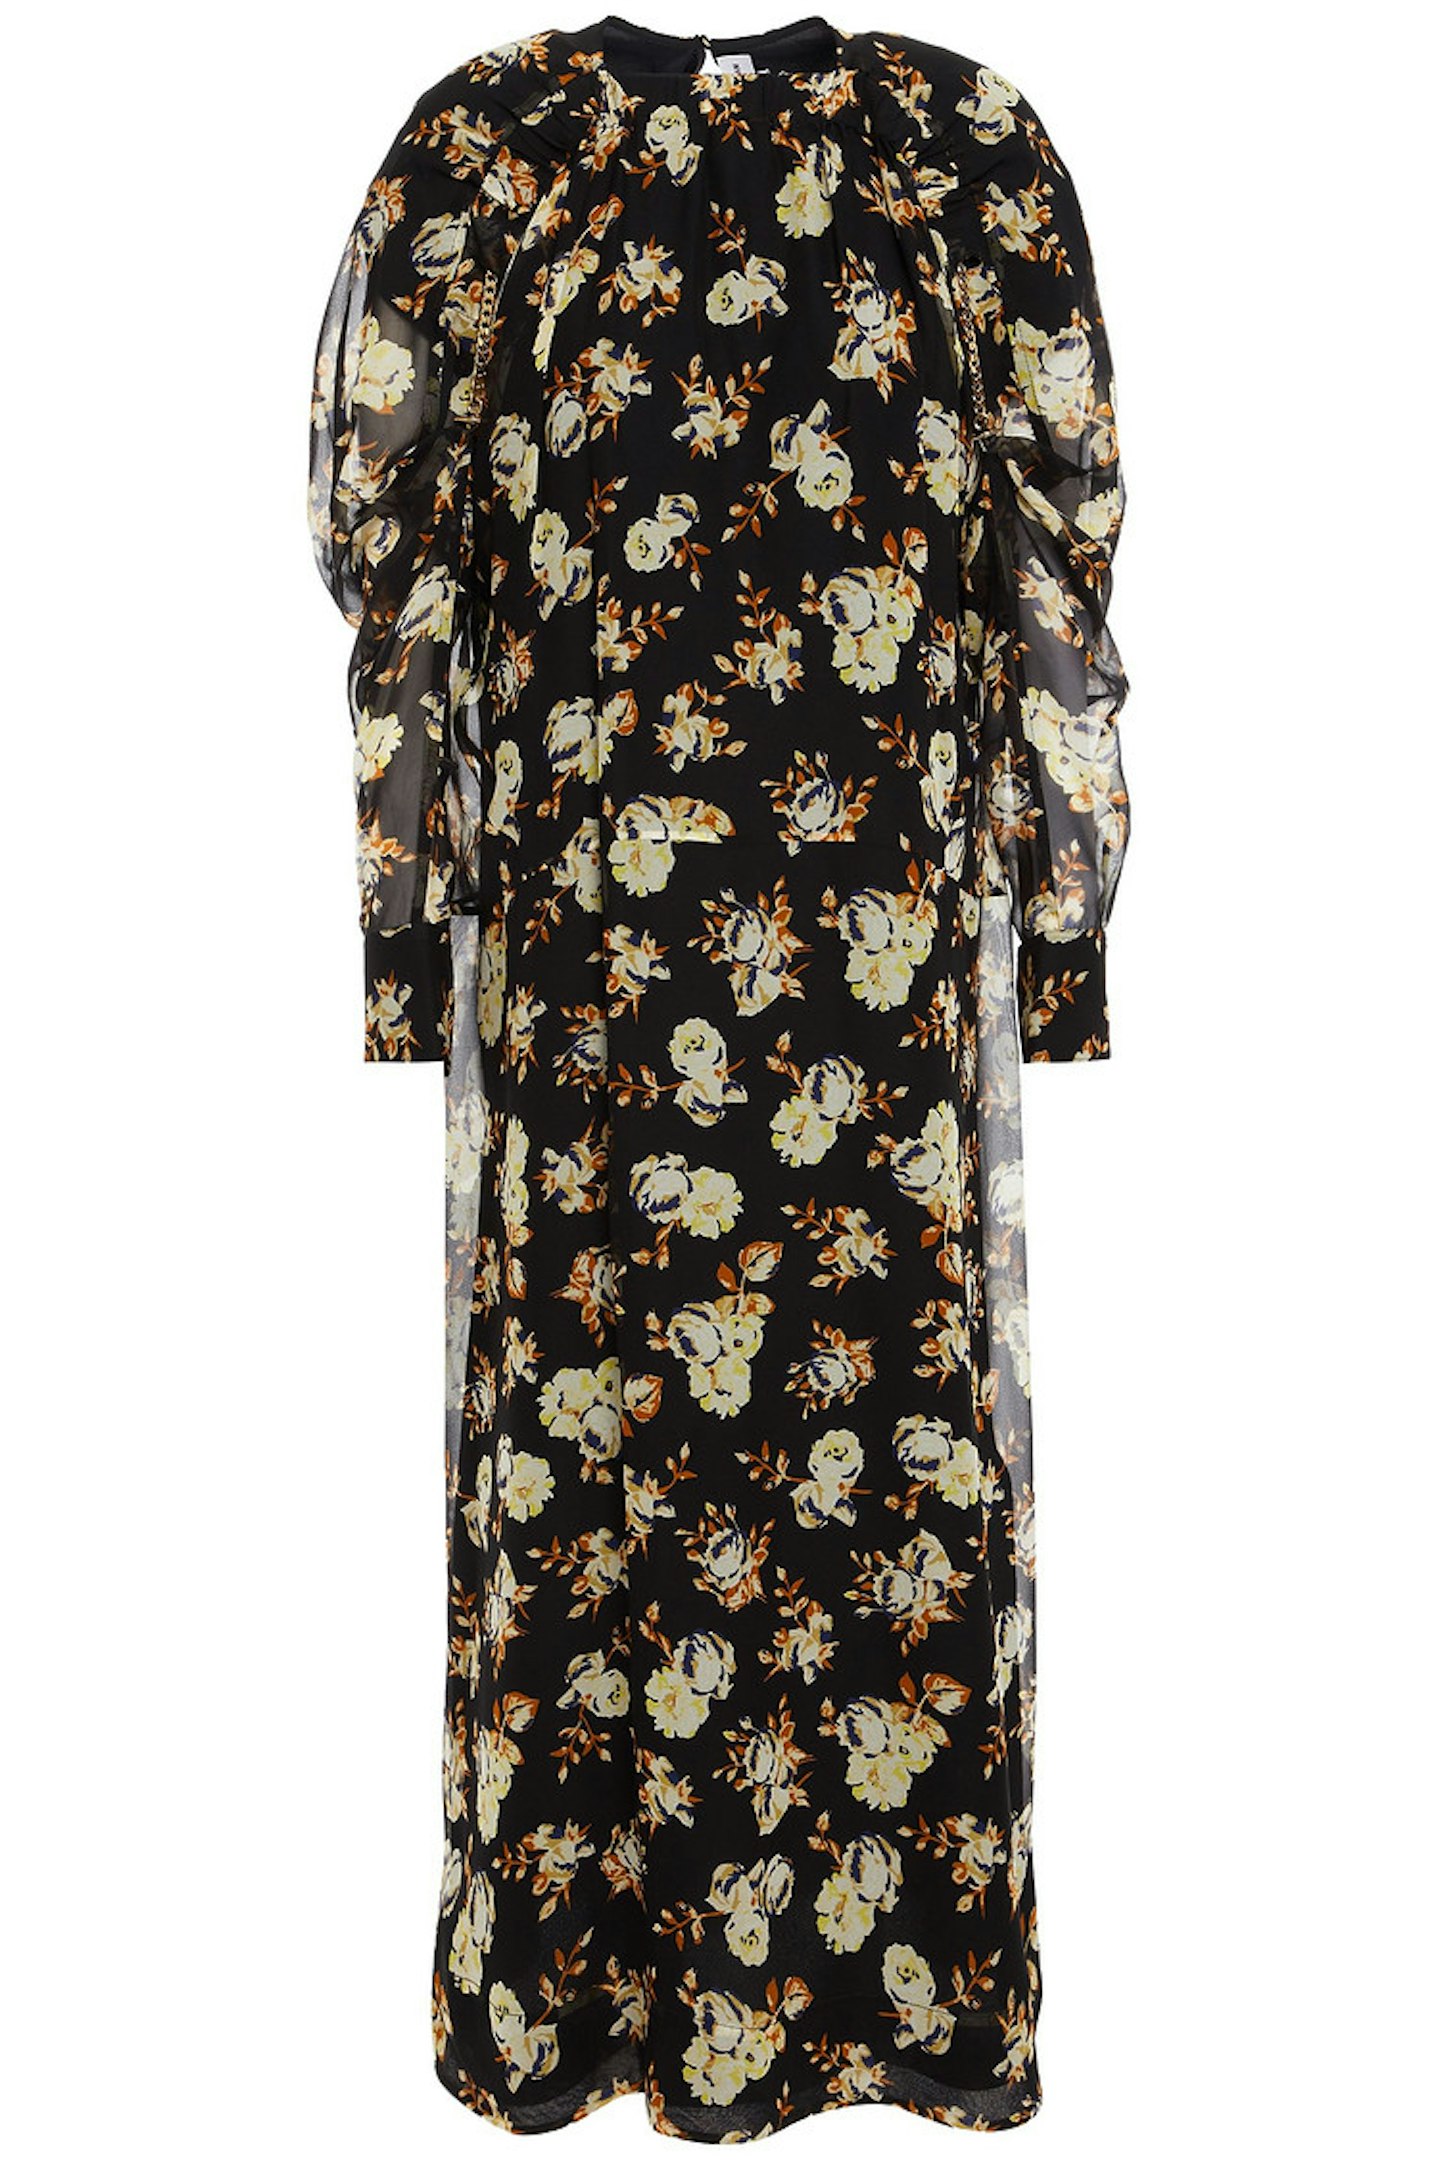 Victoria Beckham at The Outnet, Chain-embellished floral-print silk-georgette midi dress, £652